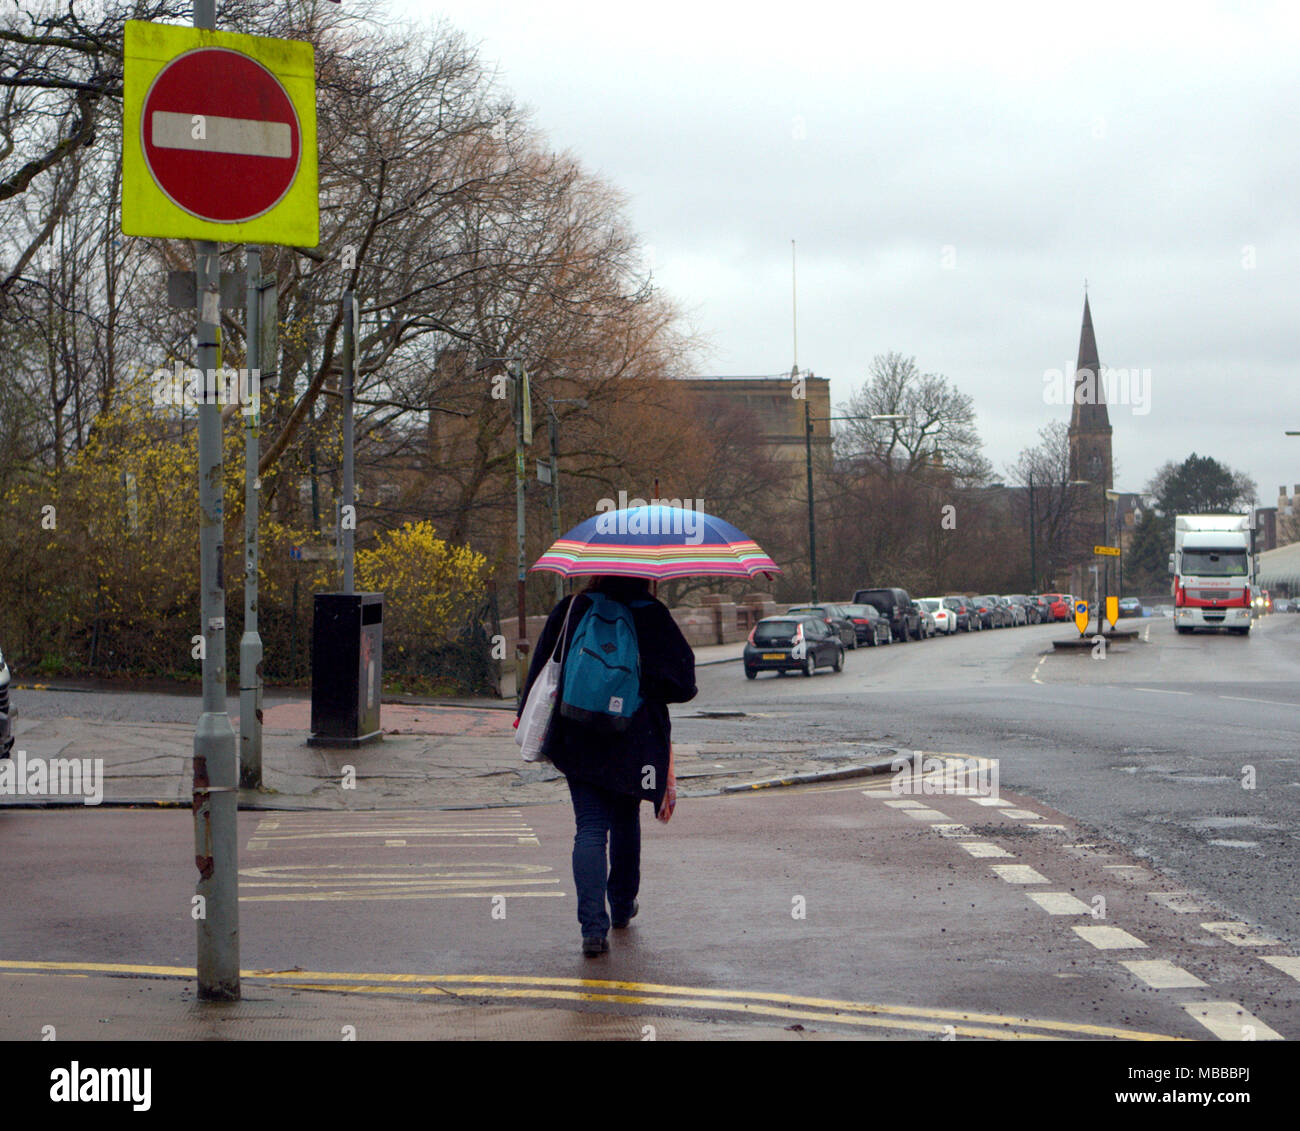 Glasgow, Scotland, UK 10th April. UK Weather :one way sign no entry queen Margaret drive  hillhead/ maryhill  oran more spire in the distance As jenna coleman visits the west end for filming its a miserable wet day with squalid showers. Gerard Ferry/Alamy news Stock Photo